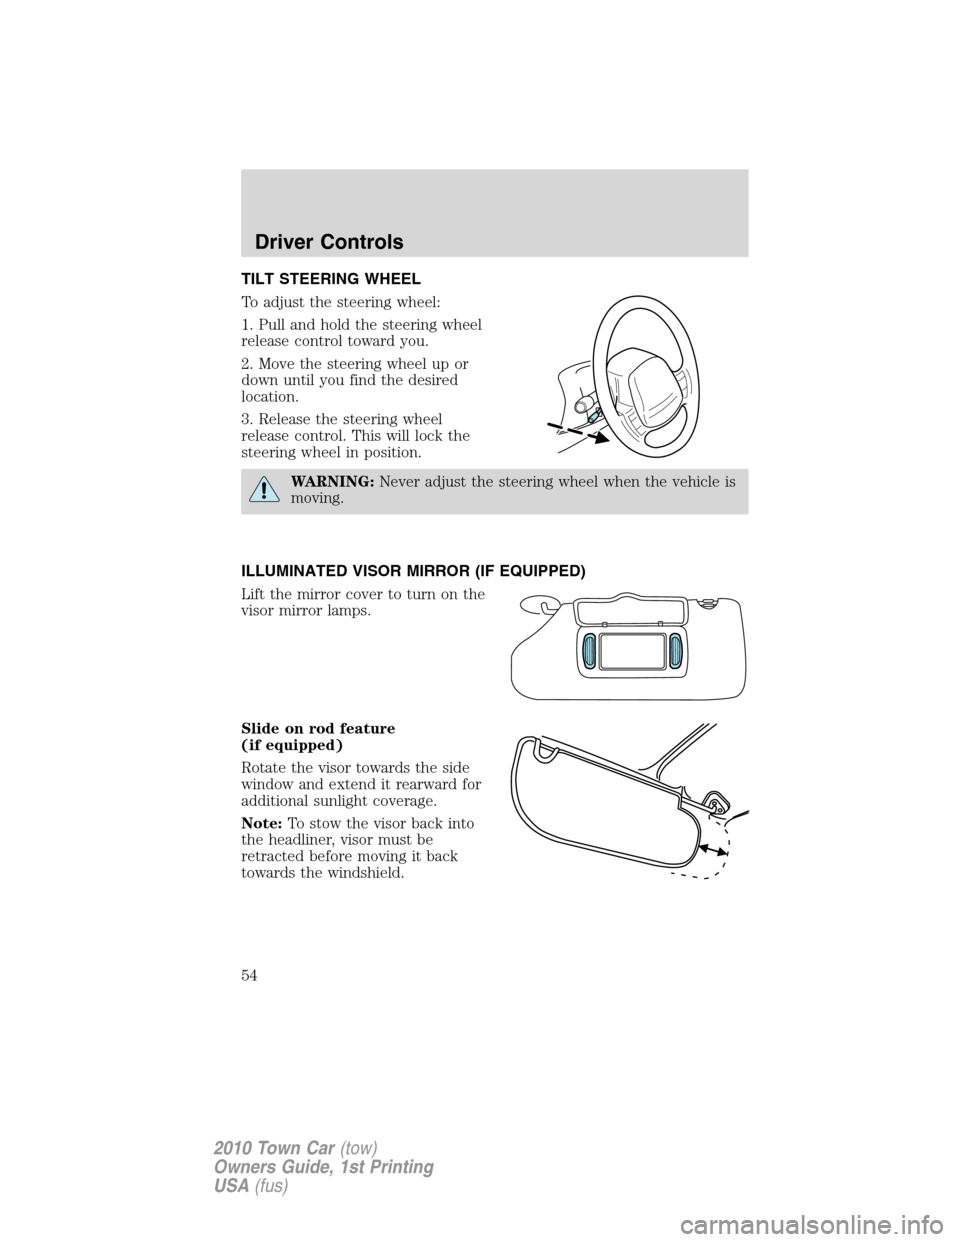 LINCOLN TOWN CAR 2010  Owners Manual TILT STEERING WHEEL
To adjust the steering wheel:
1. Pull and hold the steering wheel
release control toward you.
2. Move the steering wheel up or
down until you find the desired
location.
3. Release 